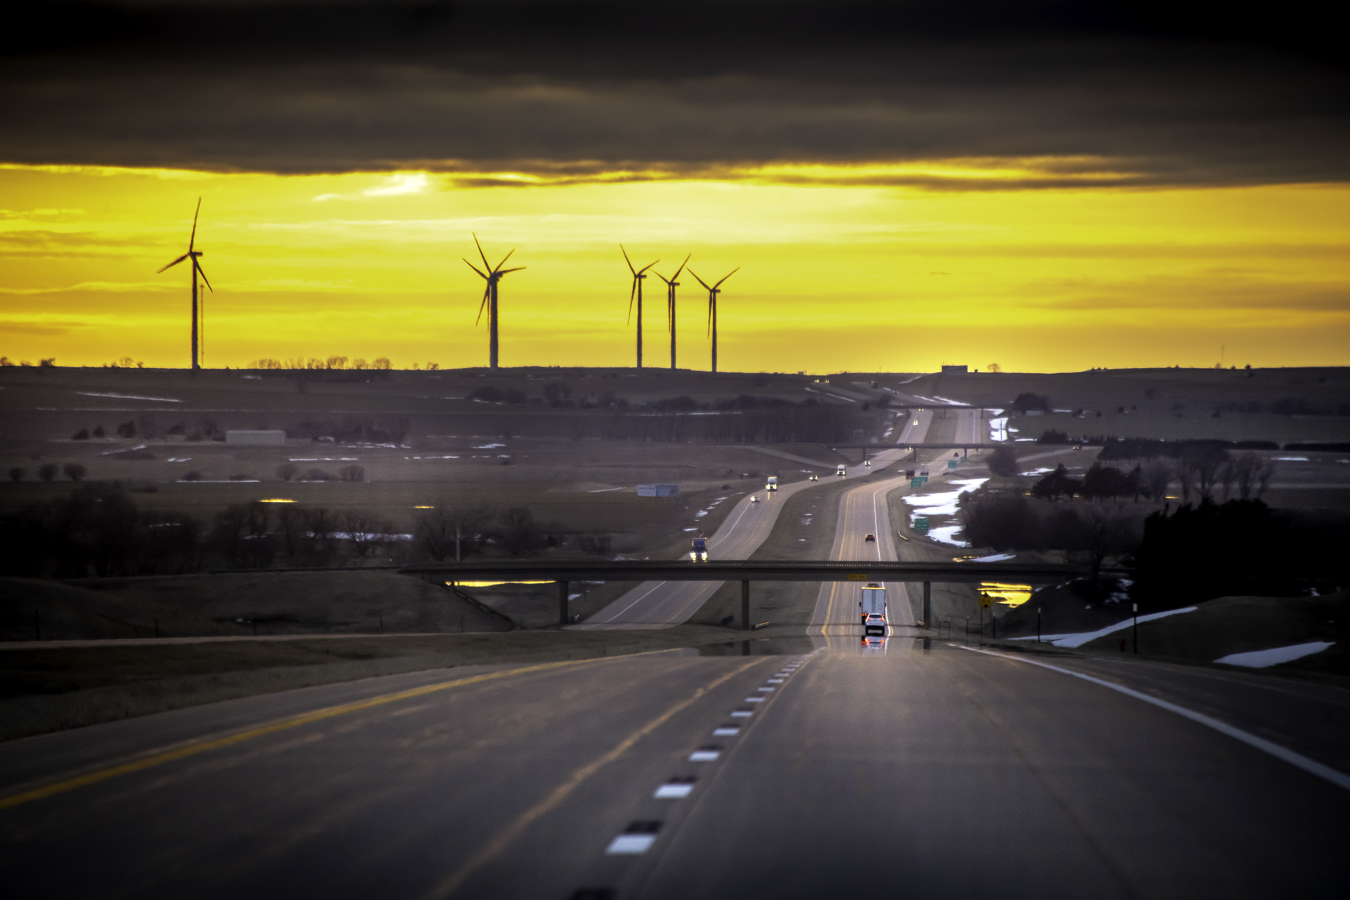 "The Expanse" - 7:16 pm heading west on I-70, March 11, 2019, about 60 miles to go to get to Hays, KS. Photo, copyright Mike Strong - kcdance.com, MikeStrongPhoto.com